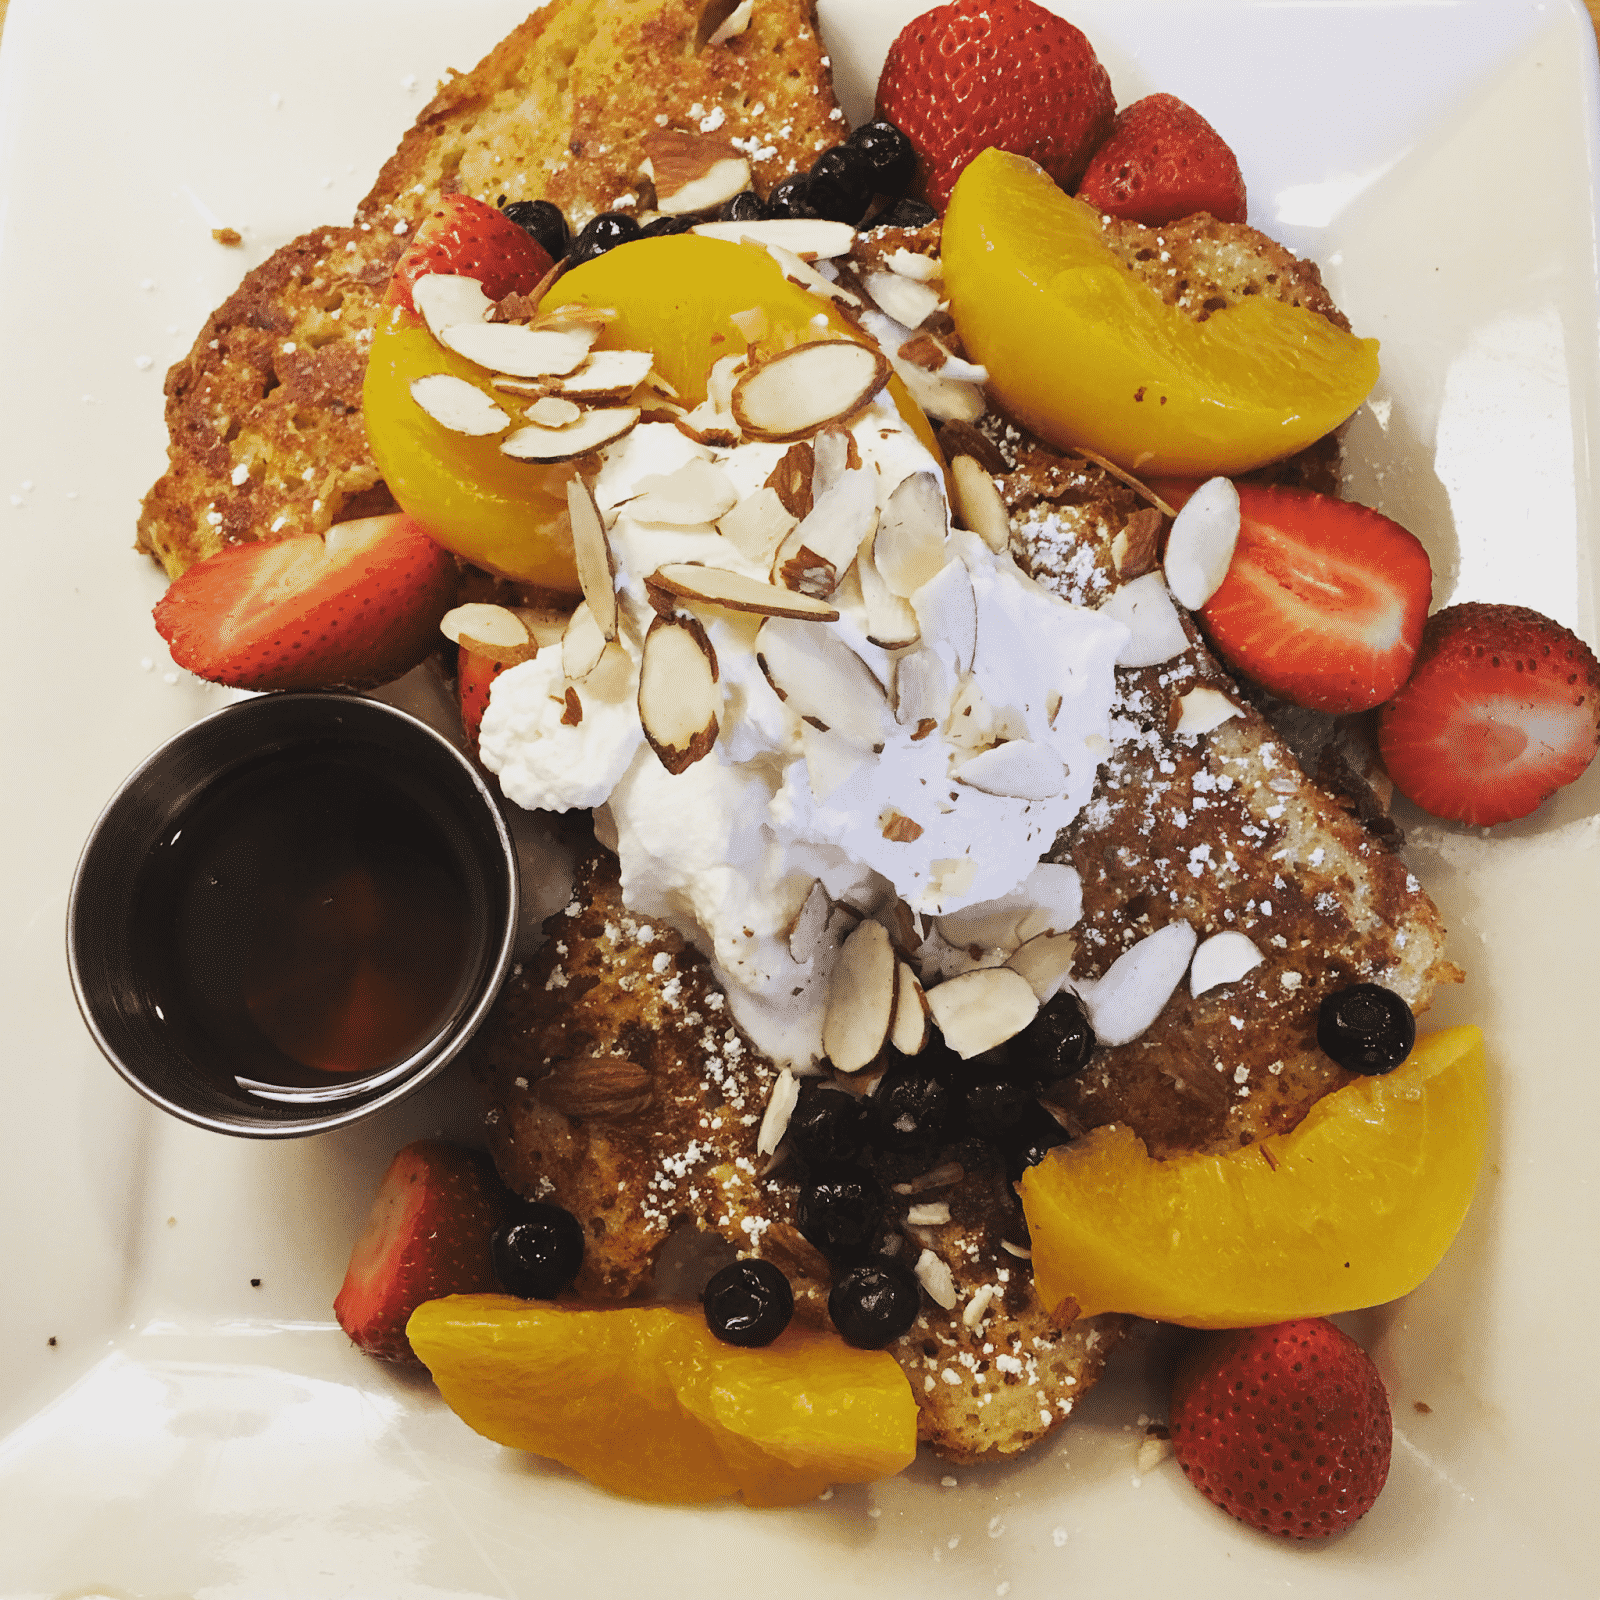 Food from Portage Bay Cafe in Seattle, Washington